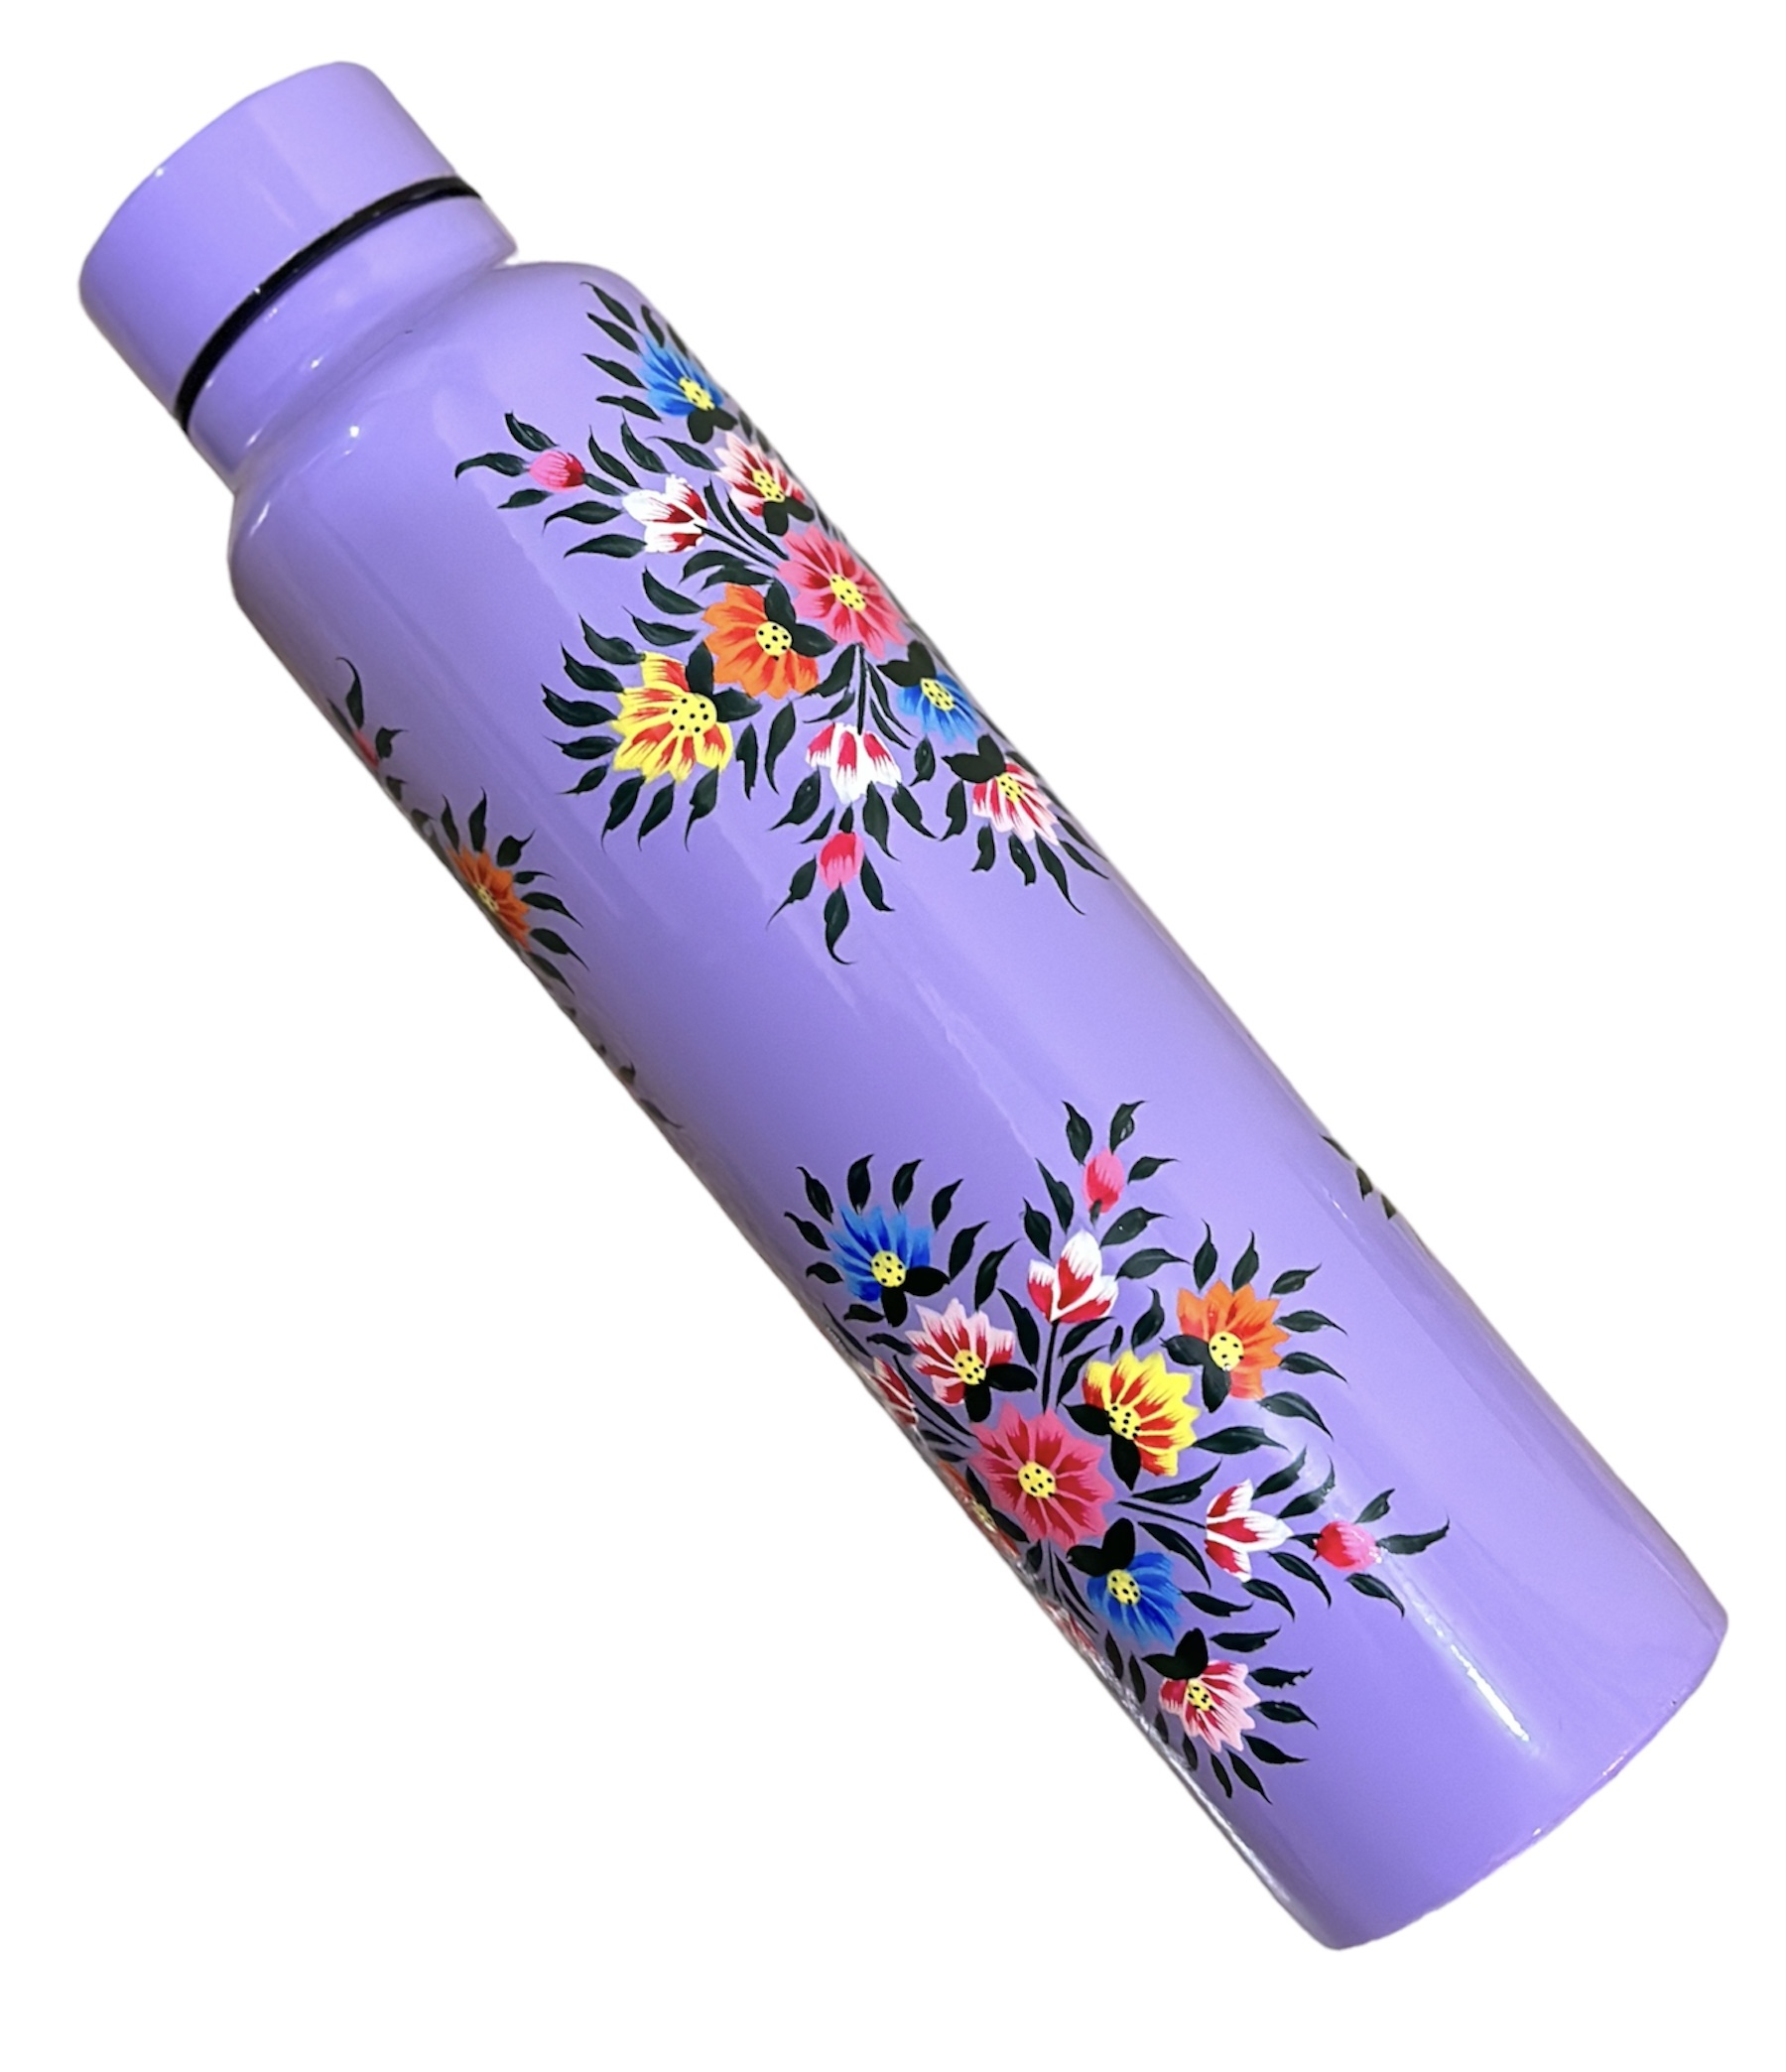 Hand painted Water Bottles, Stainless steel water bottle hand painted with lead free colors, hand painted thermos flask , boho picnic bottles